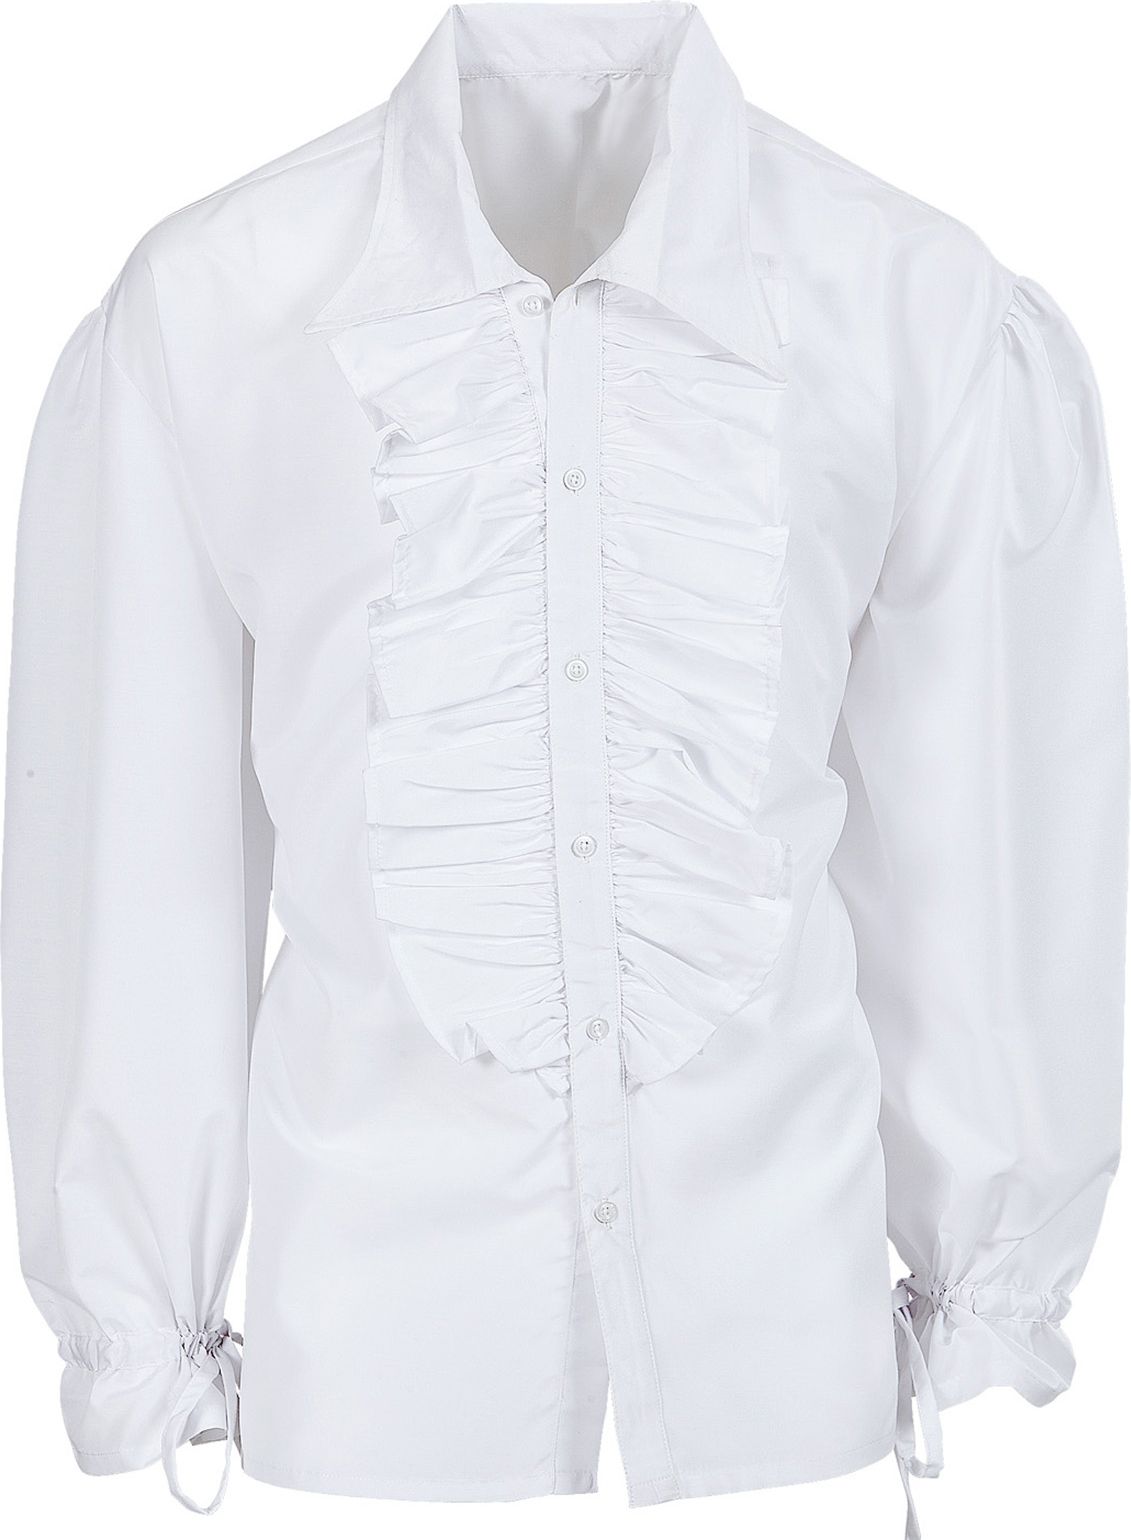 Witte ruches blouse